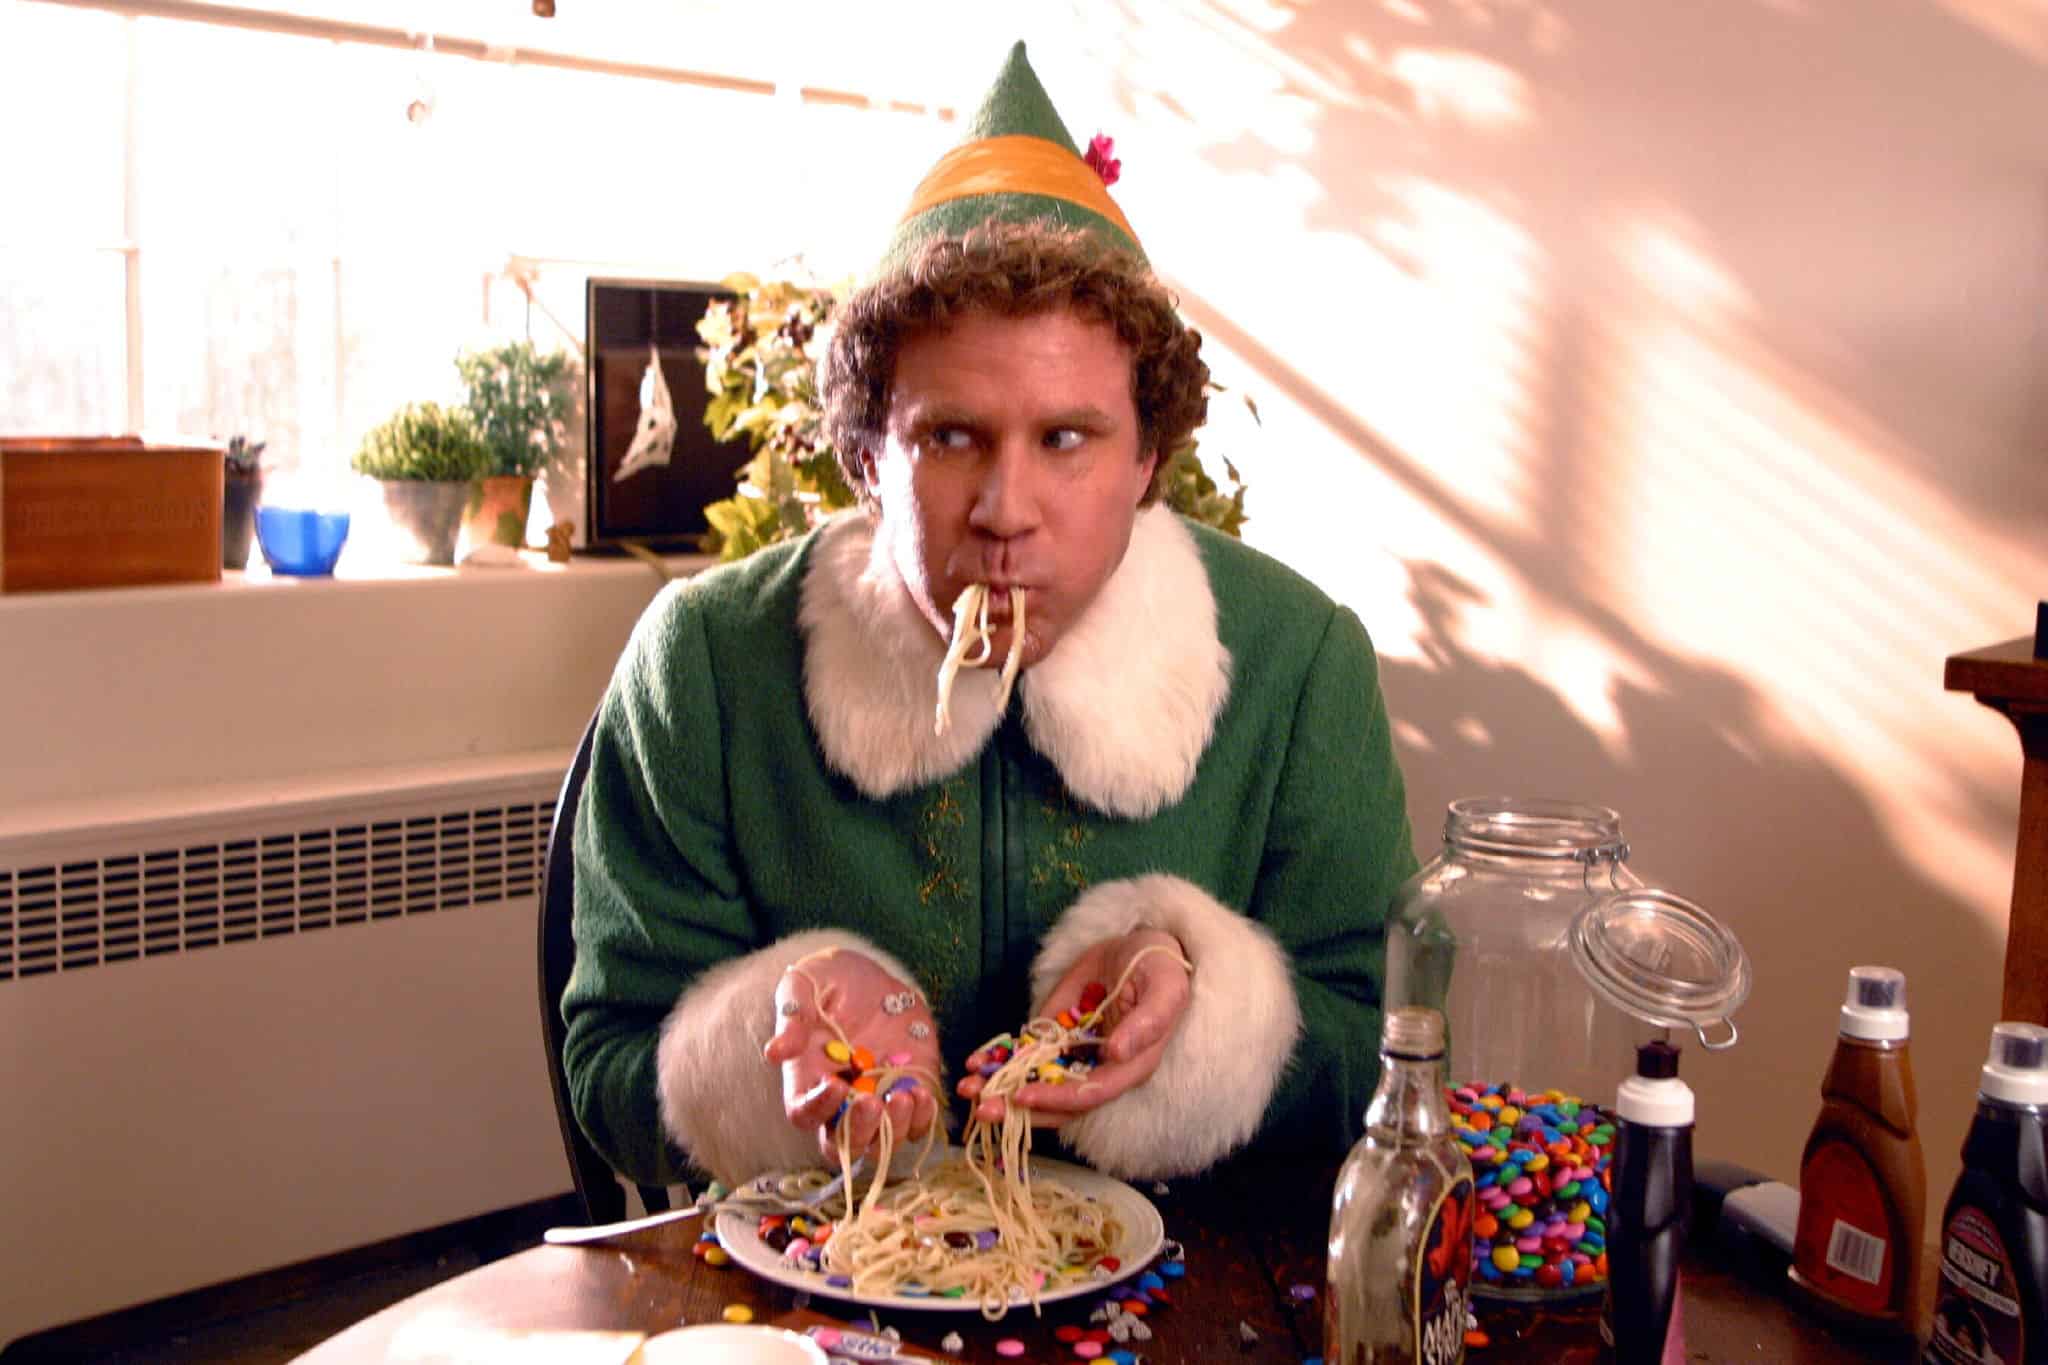 A human-sized elf eating spaghetti and M&Ms with his hands in this image from New Line Cinema.